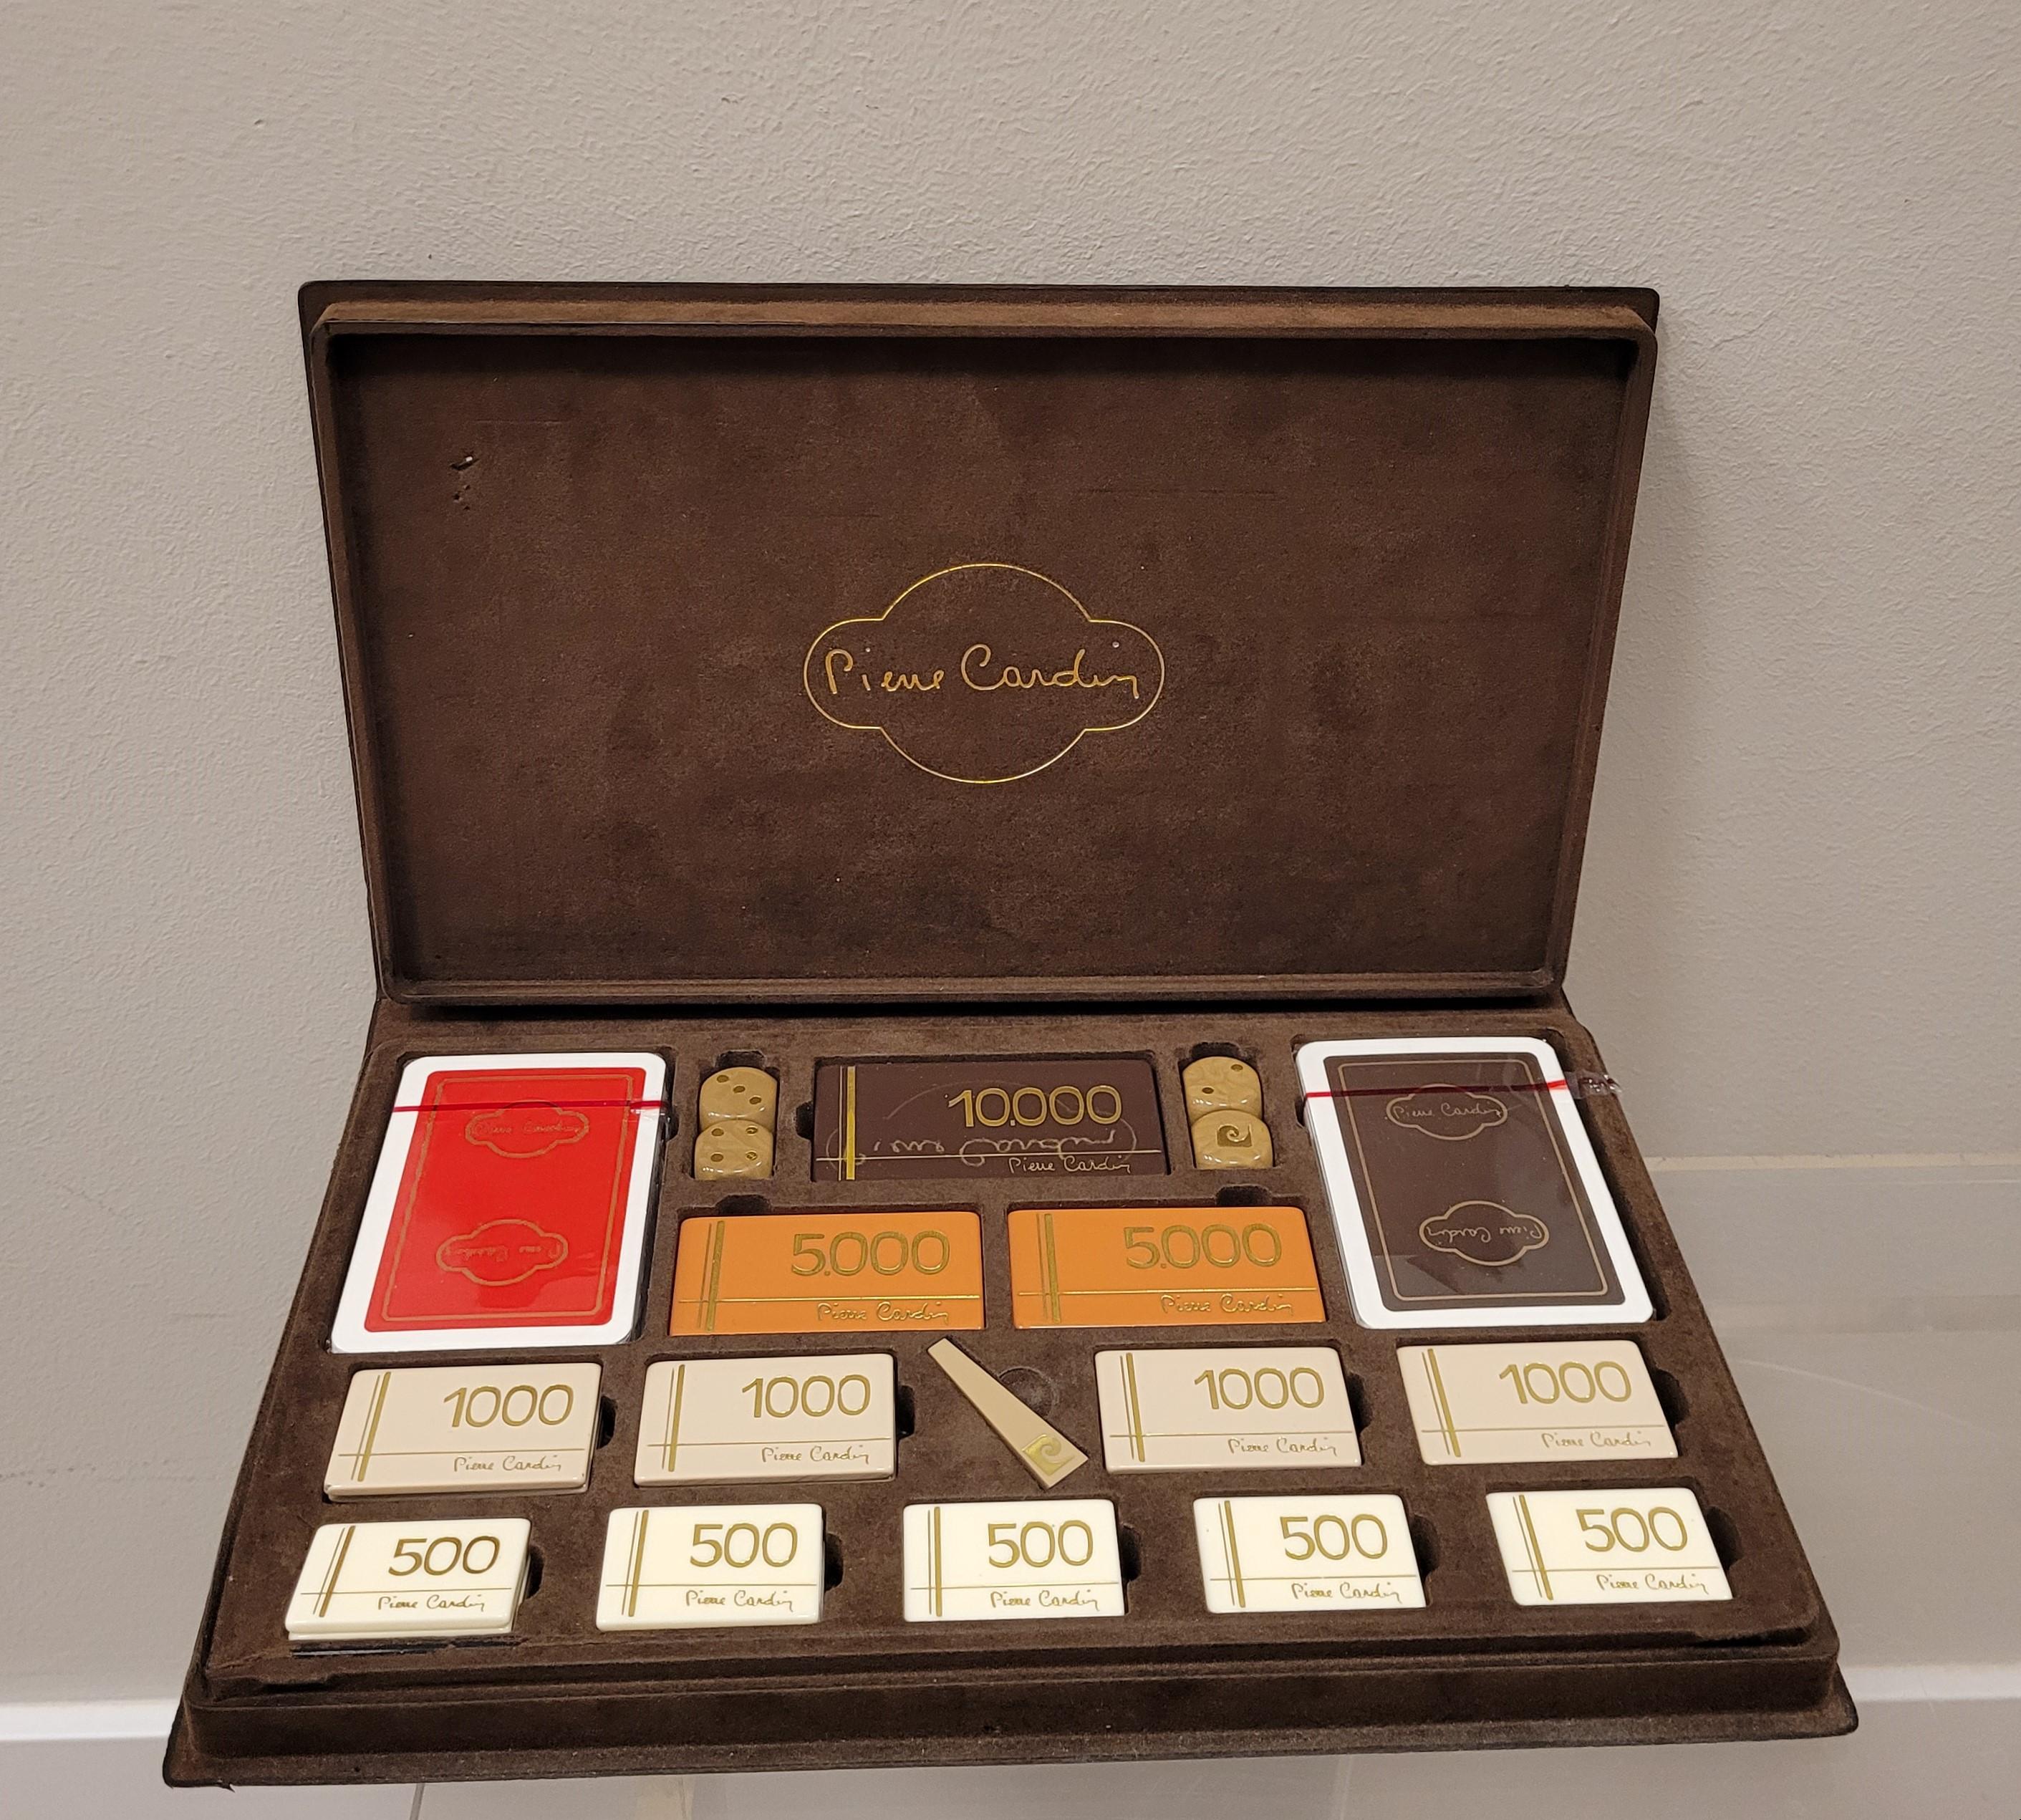 Vintage poker game, from the 60s or 70s, signed by the prestigious French designer Pierre Cardin. The box is made of brown velvet, and contains 2 new decks of cards and 48 tokens decorated with gold leaf, including the signature on each of them. In